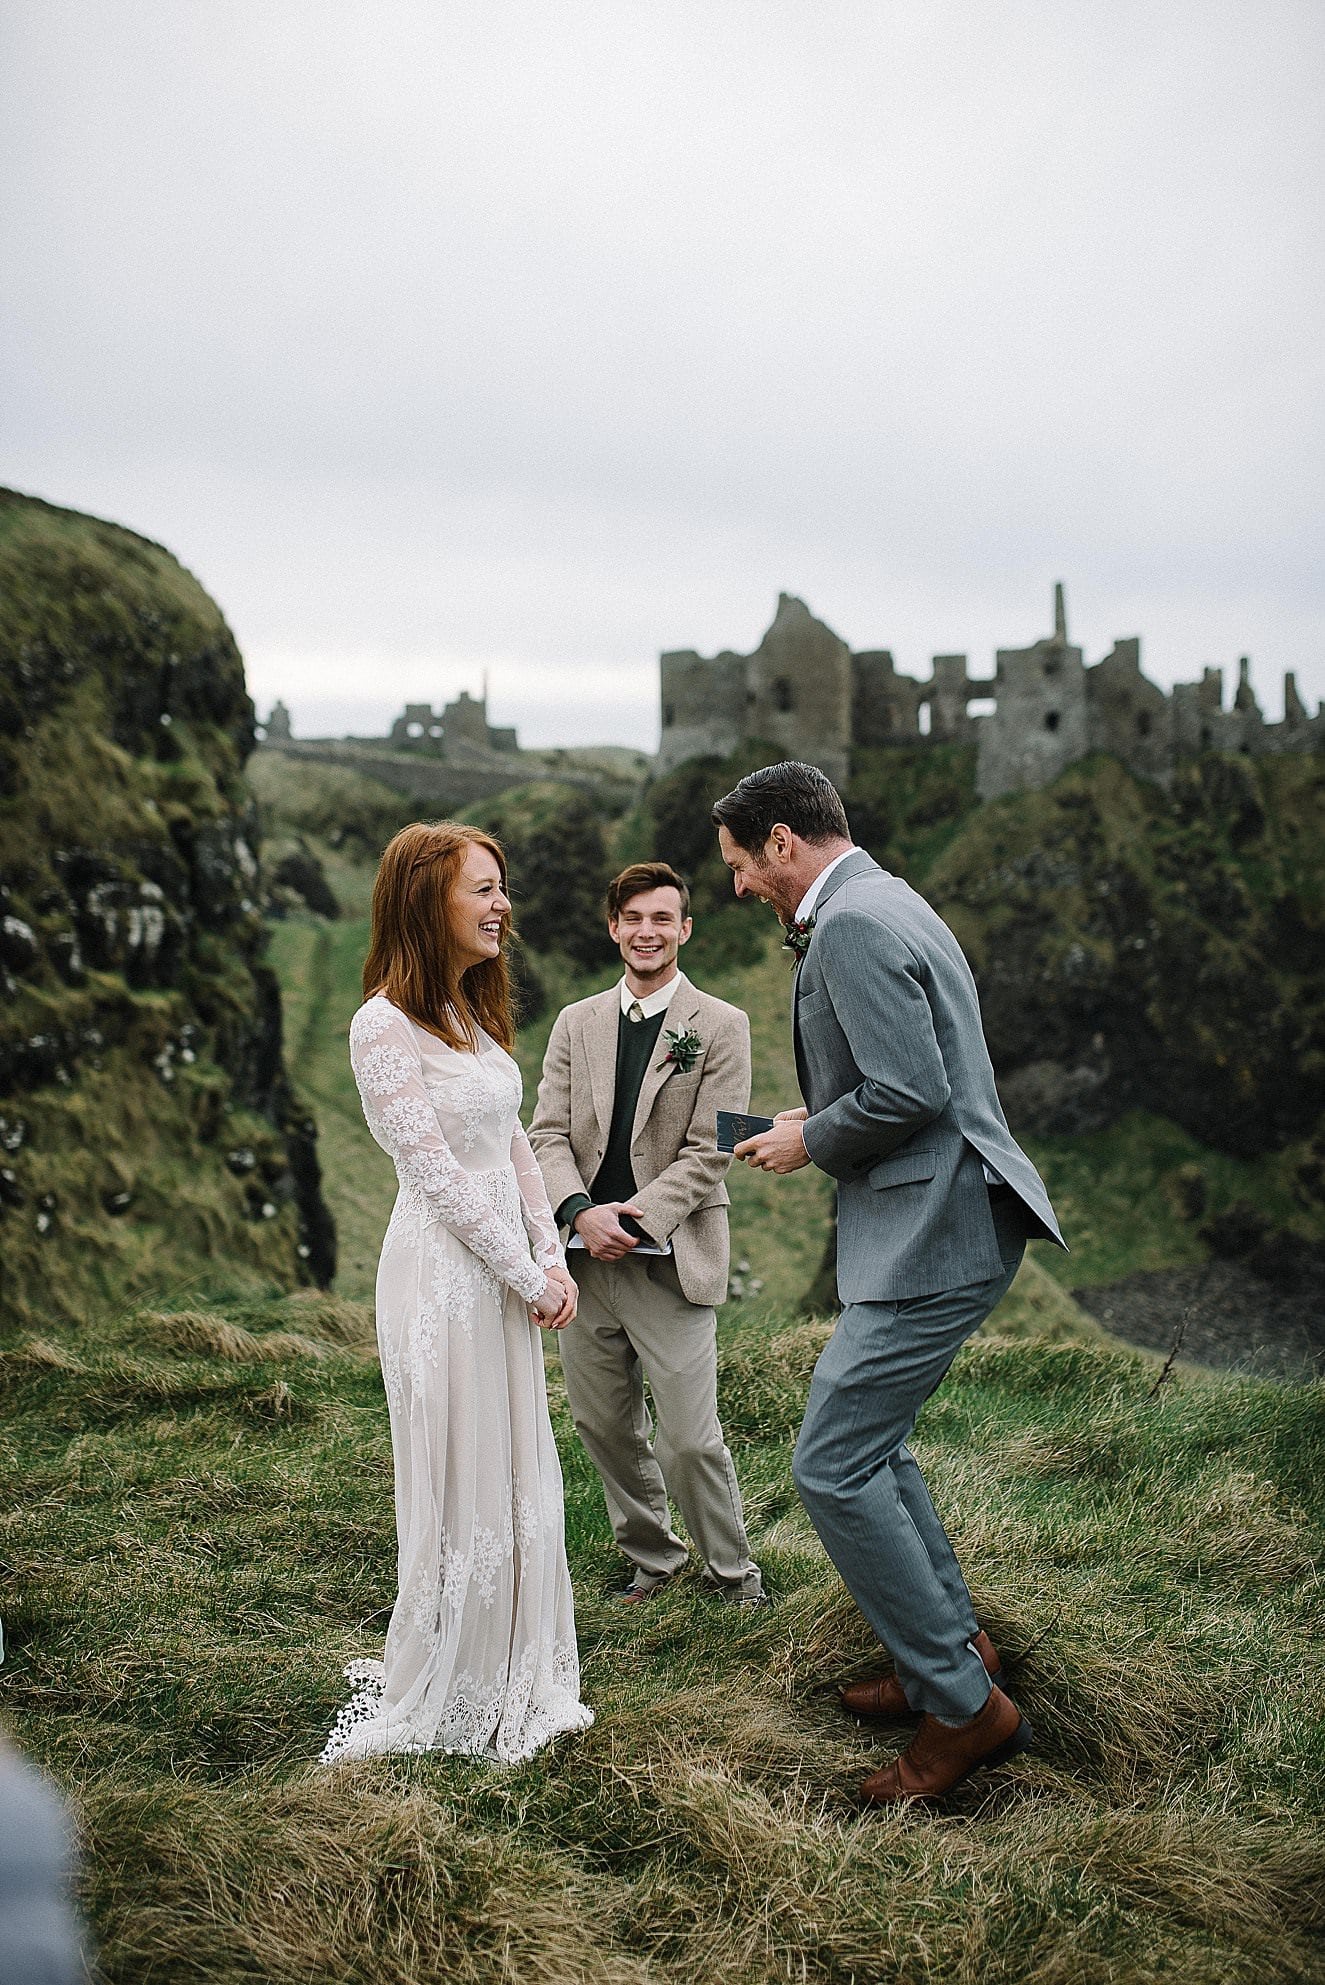 Joyful moments during an elopement ceremony at Dunluce Castle in Northern Ireland 